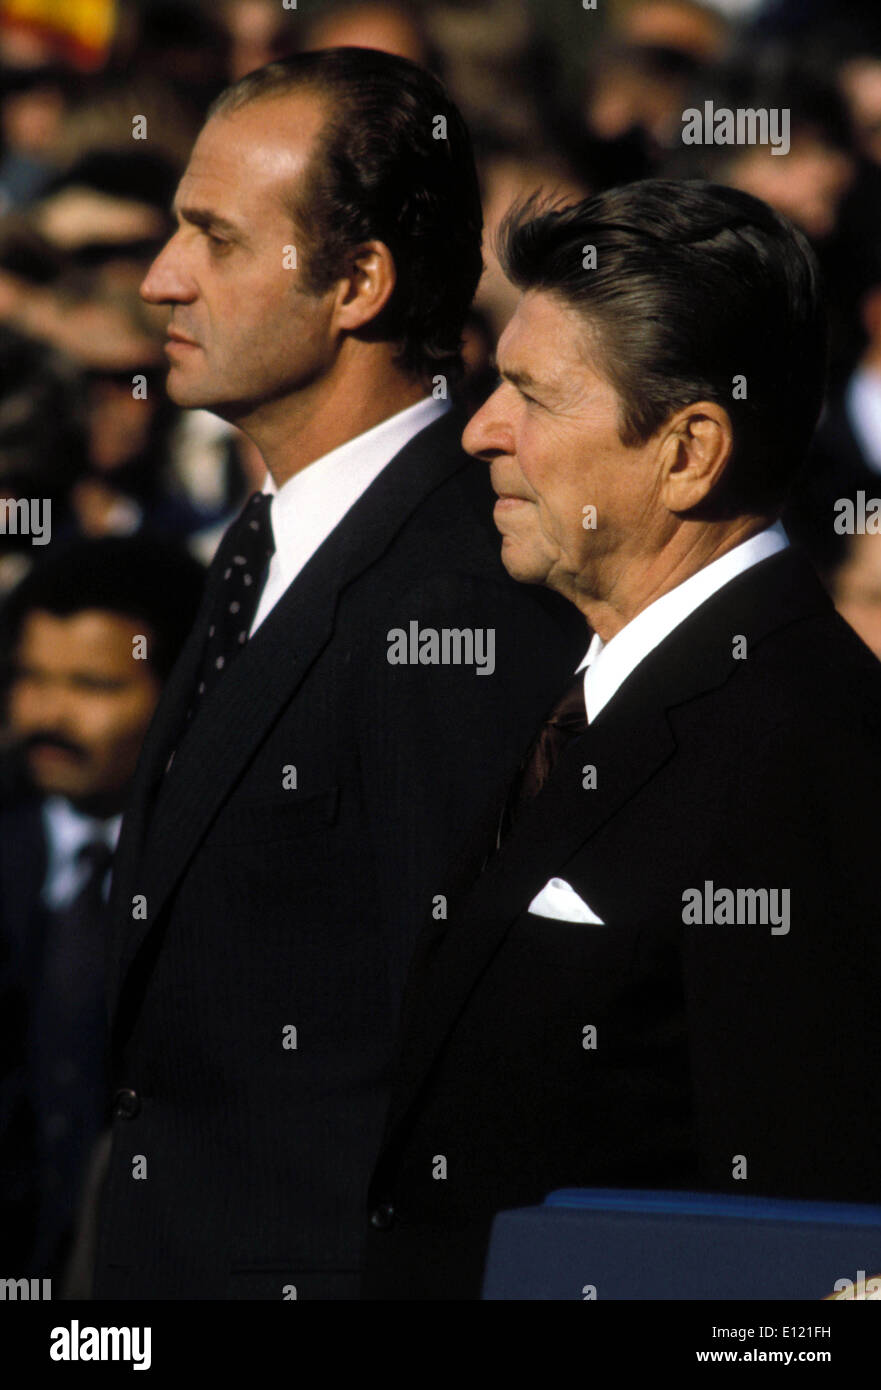 Oct 13, 1981; Washington, DC, USA; United States republican President RONALD REAGAN and King of Spain JUAN CARLOS I during welcoming ceremony at the White House.. (Credit Image: KEYSTONE Pictures USA/ZUMAPRESS.com) Stock Photo